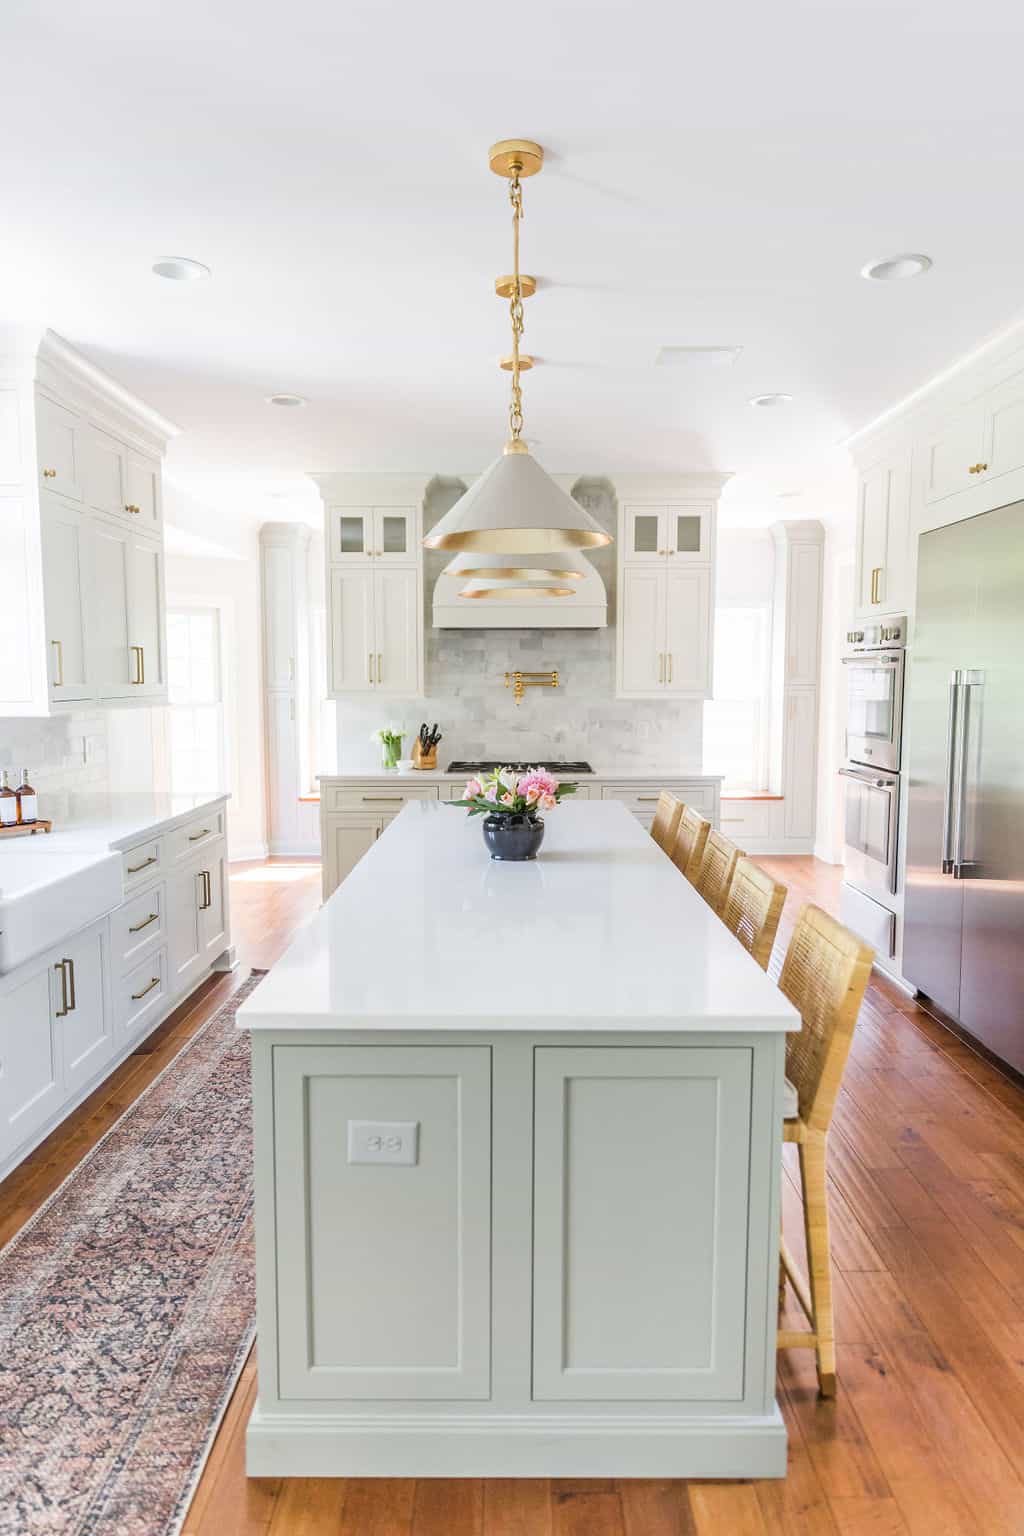 Nicholas Design Build | A remodeled white kitchen with a large island and chairs.